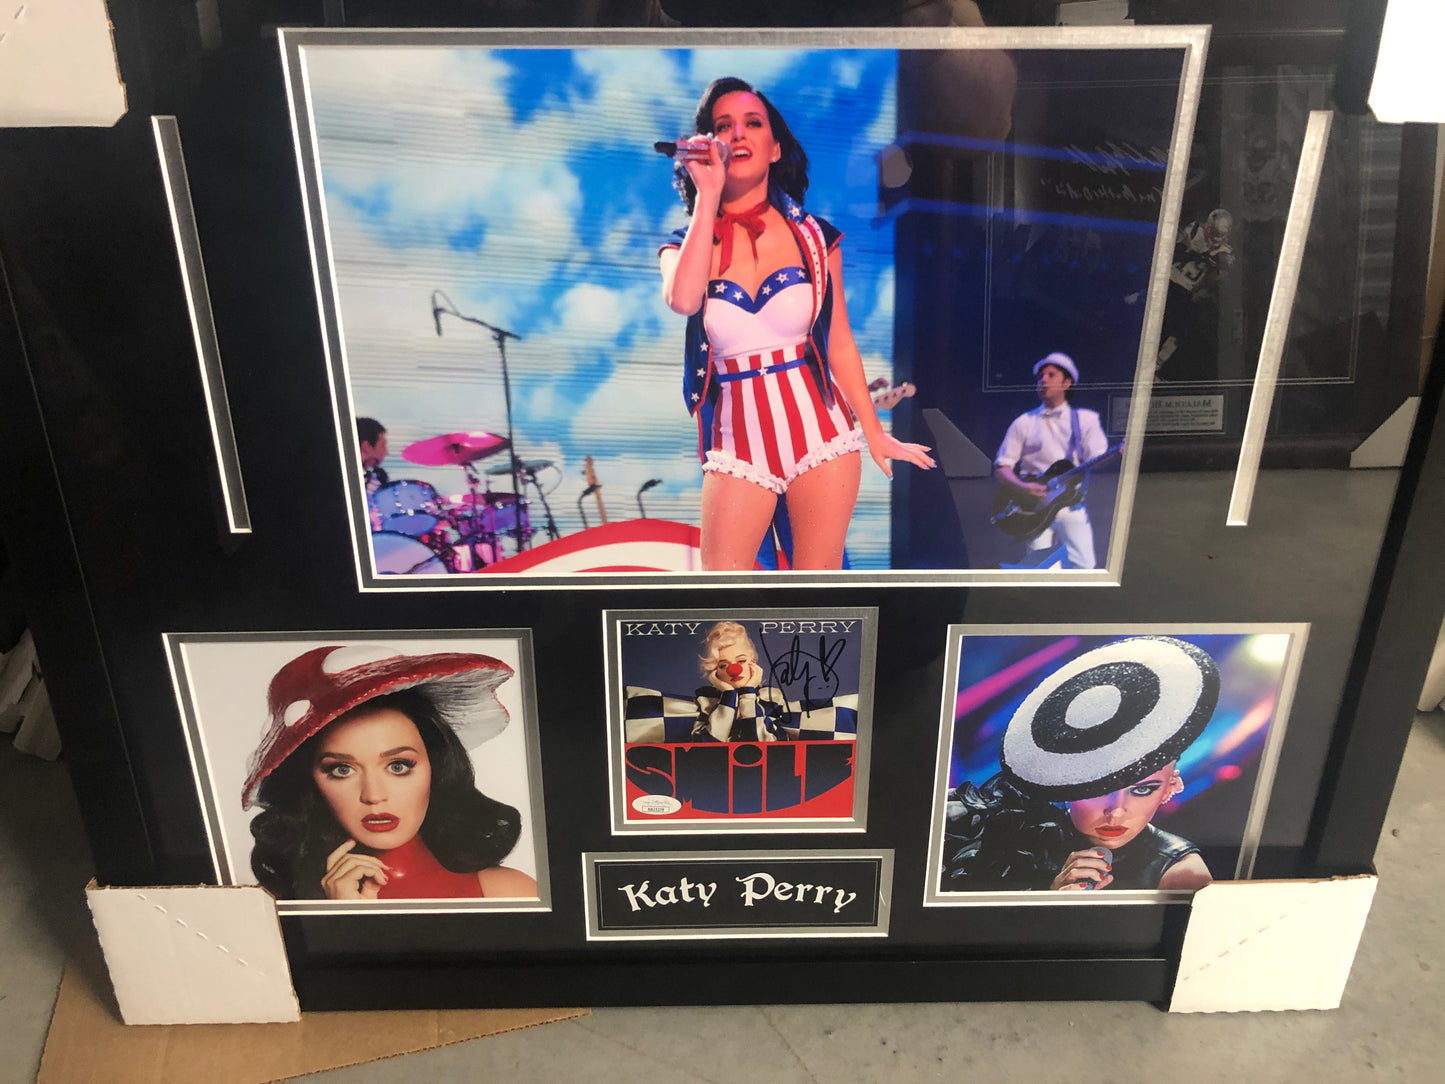 Katy Perry custom framed signed CD cover with JSA Certification